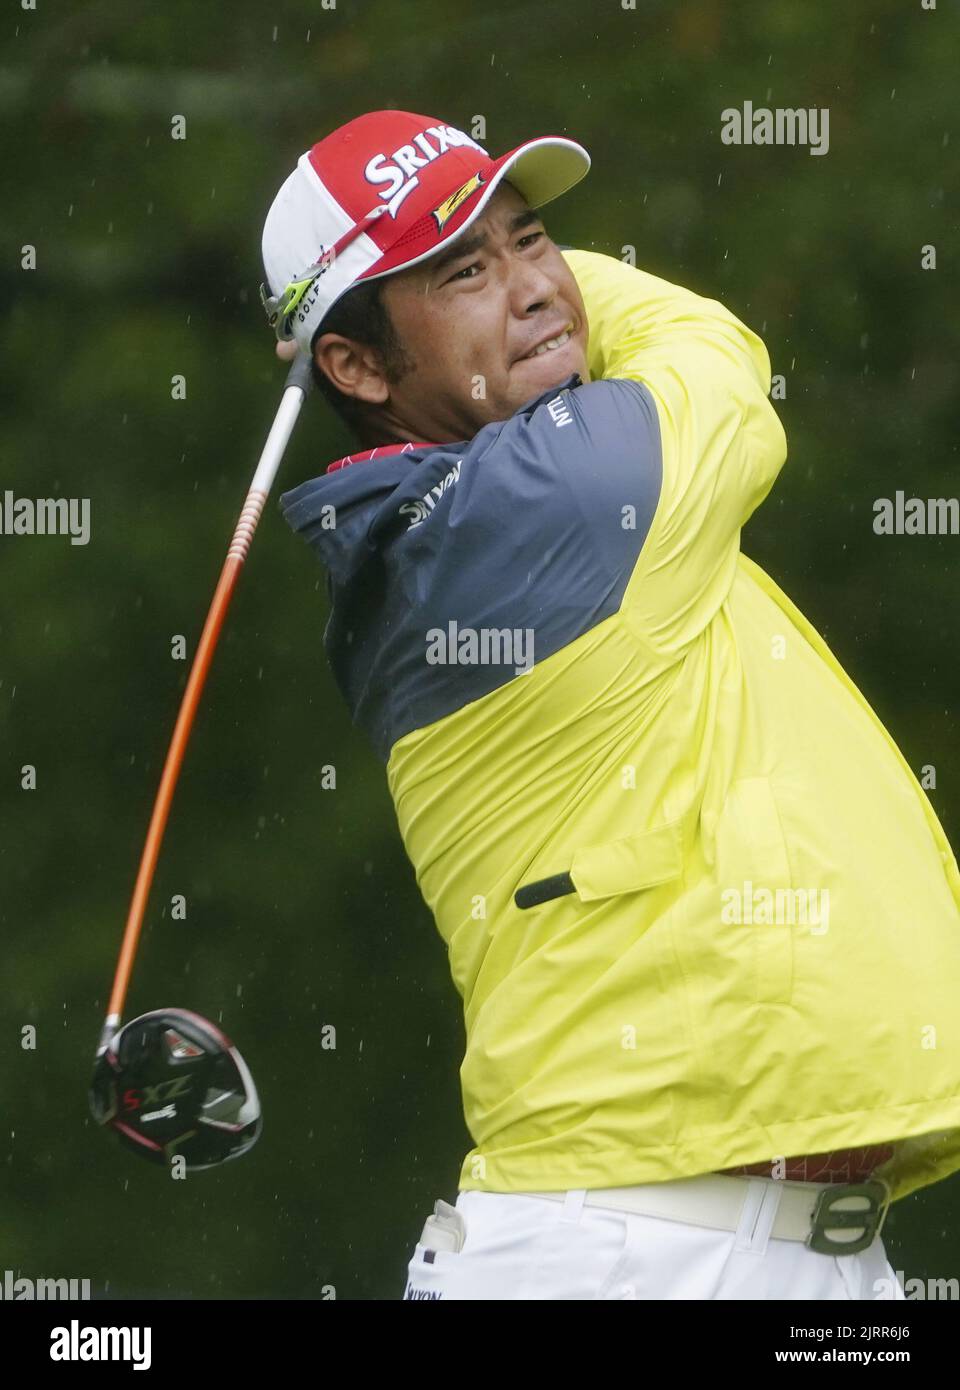 Hideki Matsuyama of Japan hits off the fifth tee during the first round of the Tour Championship at East Lake Golf Club in Atlanta, Georgia, on Aug. 25, 2022. (Kyodo)==Kyodo Photo via Credit: Newscom/Alamy Live News Stock Photo